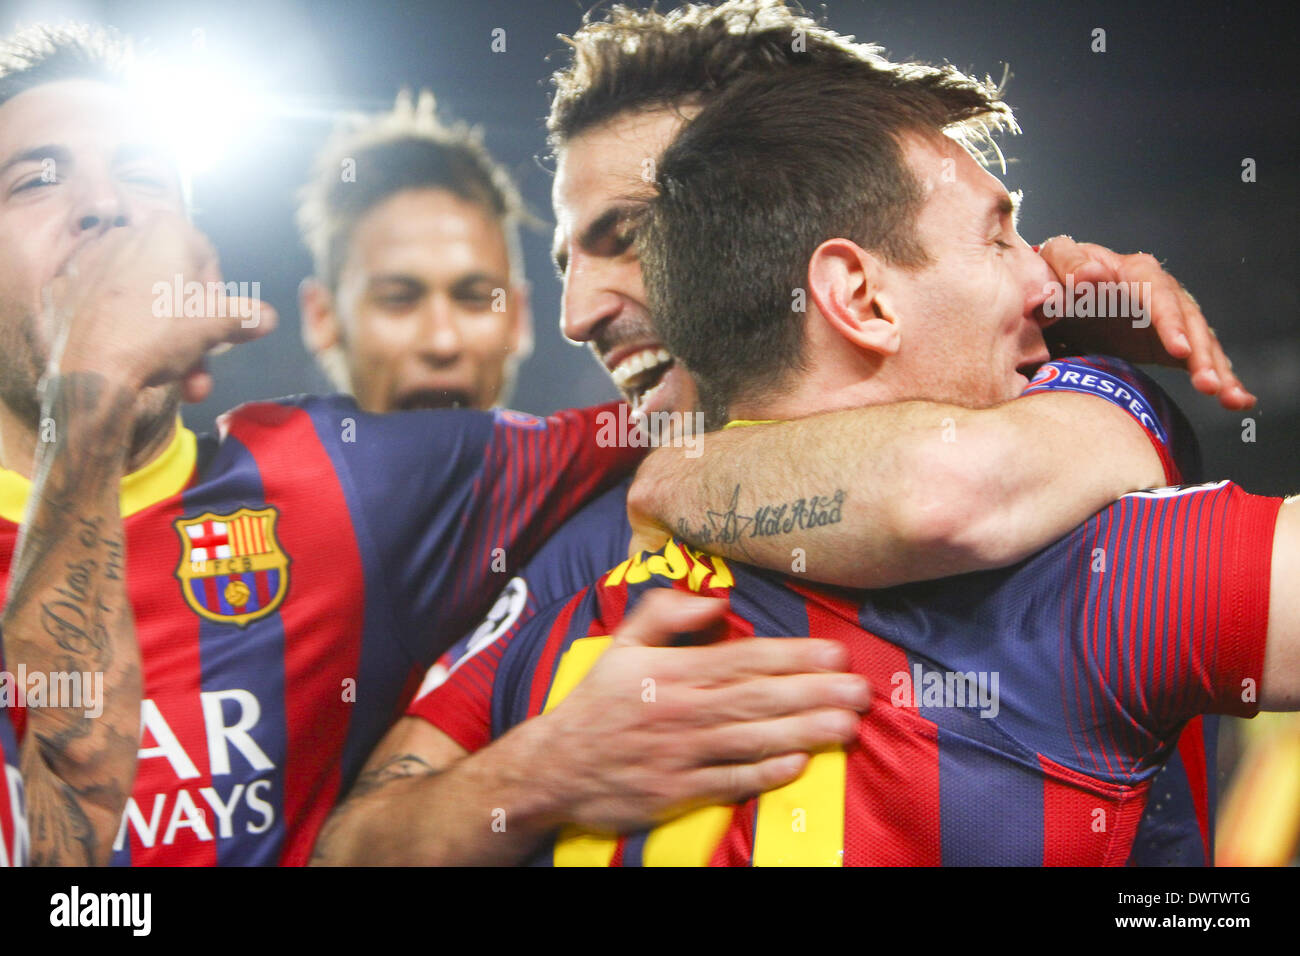 Barcellona, Spain. 12th Mar, 2014. Neymar, Leo Messi, Cesc Fabregas and Jordi Alba celebrating the goal in the match between FC Barcelona and Manchester City, for the second leg of the round of 16 of the Champions League match at the Camp Nou on March 12, 2014. Photo: Ricard Rovira/Urbanandsport/Nurphoto. Credit:  Ricard Rovira/NurPhoto/ZUMAPRESS.com/Alamy Live News Stock Photo